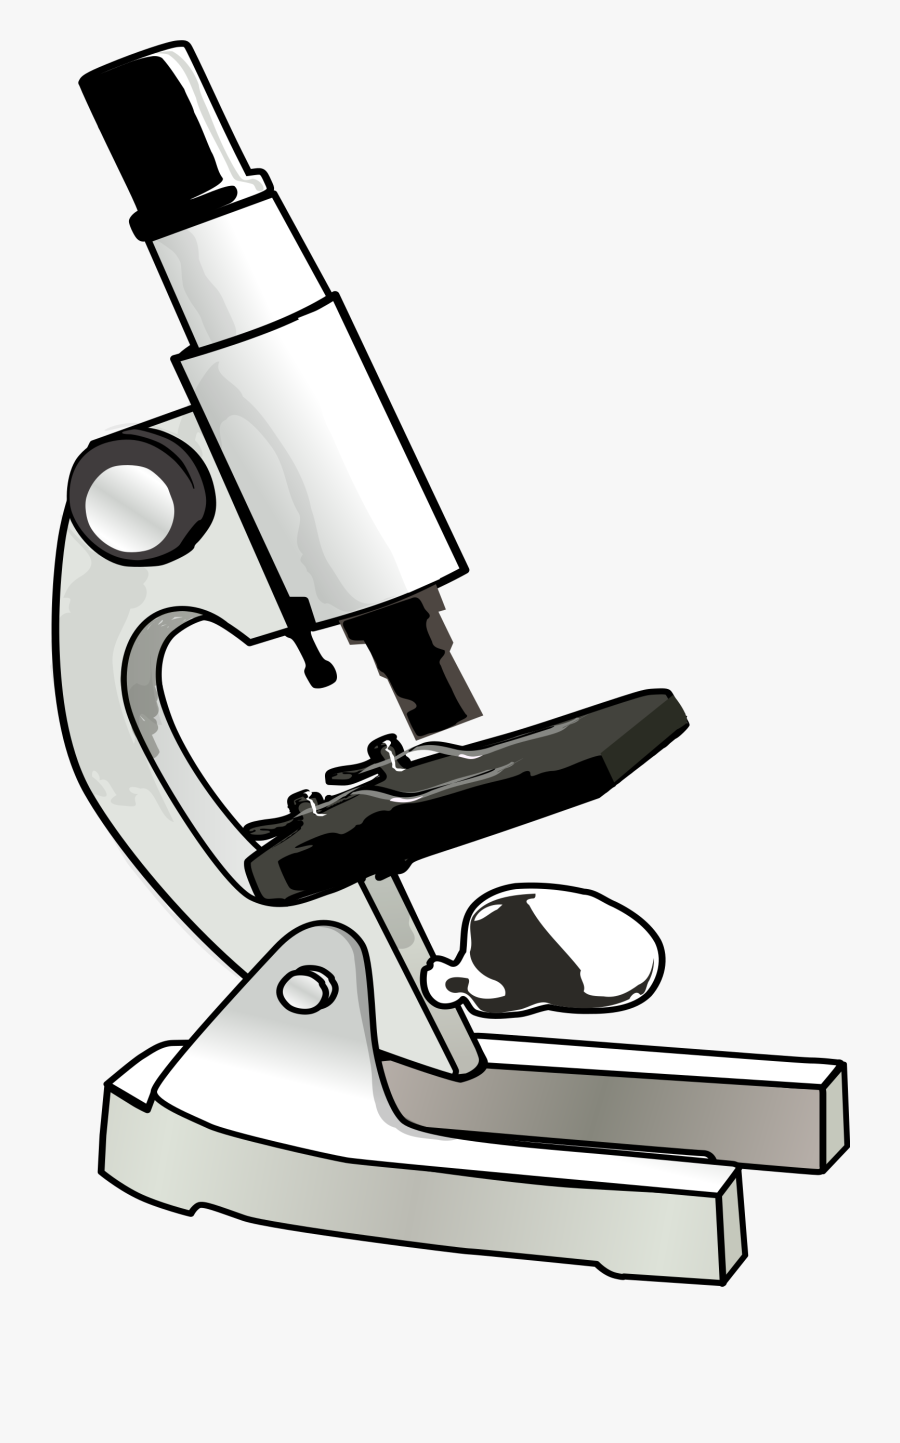 Bacteria Clipart Science - Microscope Clipart, Transparent Clipart